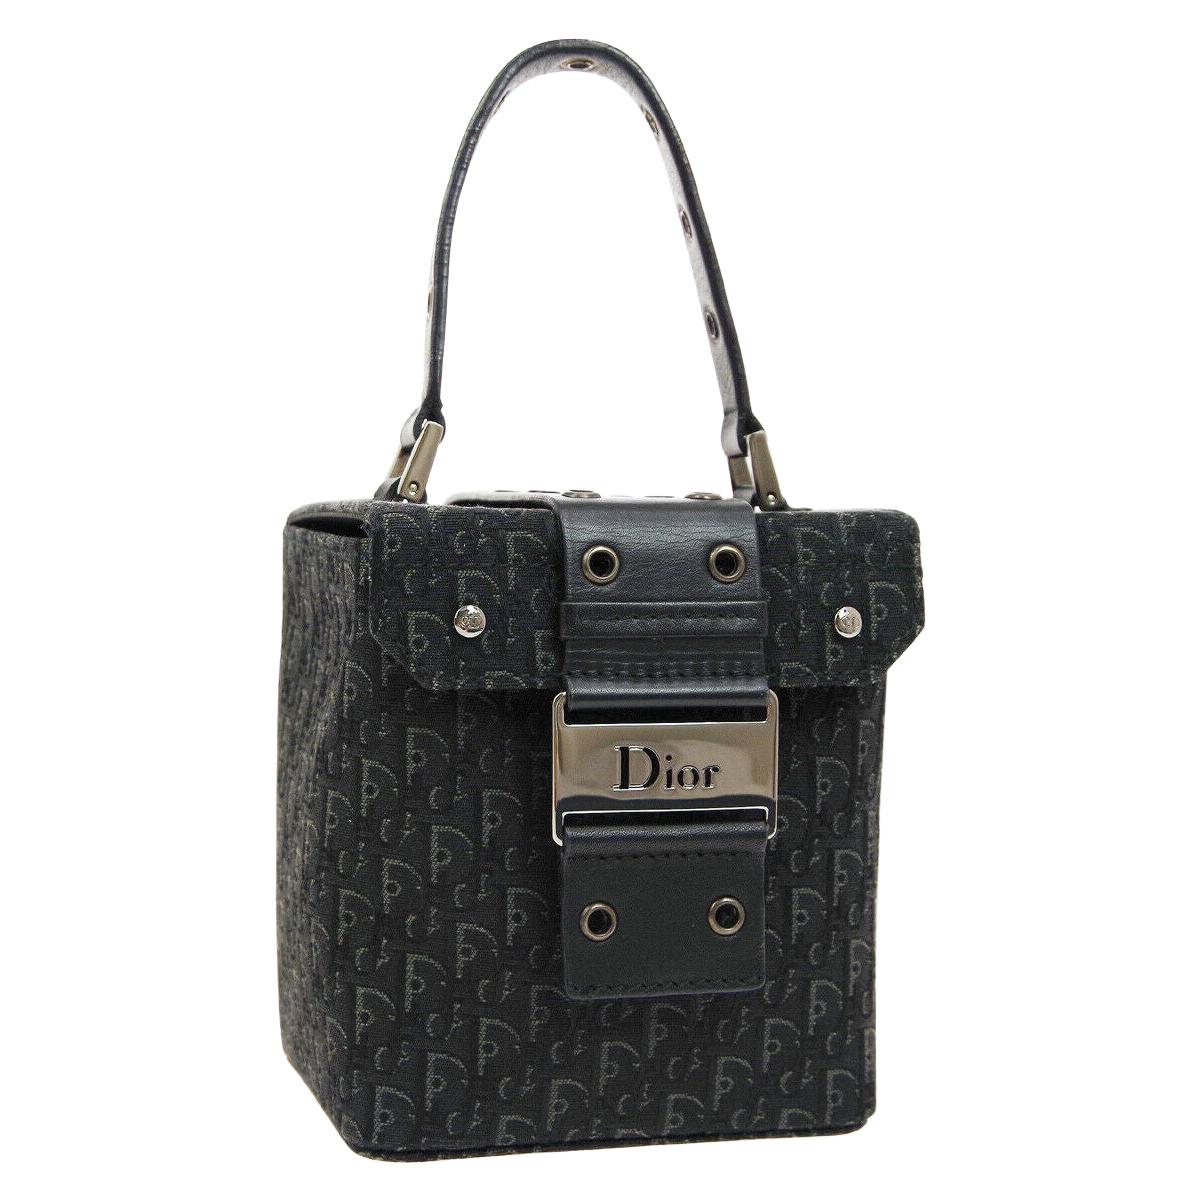 CHRISTIAN DIOR EVENING BAG, with bead black handle, checkered fabric,  magnetic closure at the top, silver tone hardware and bottom feet, 25cm x  20cm H x 7cm with dust bag.